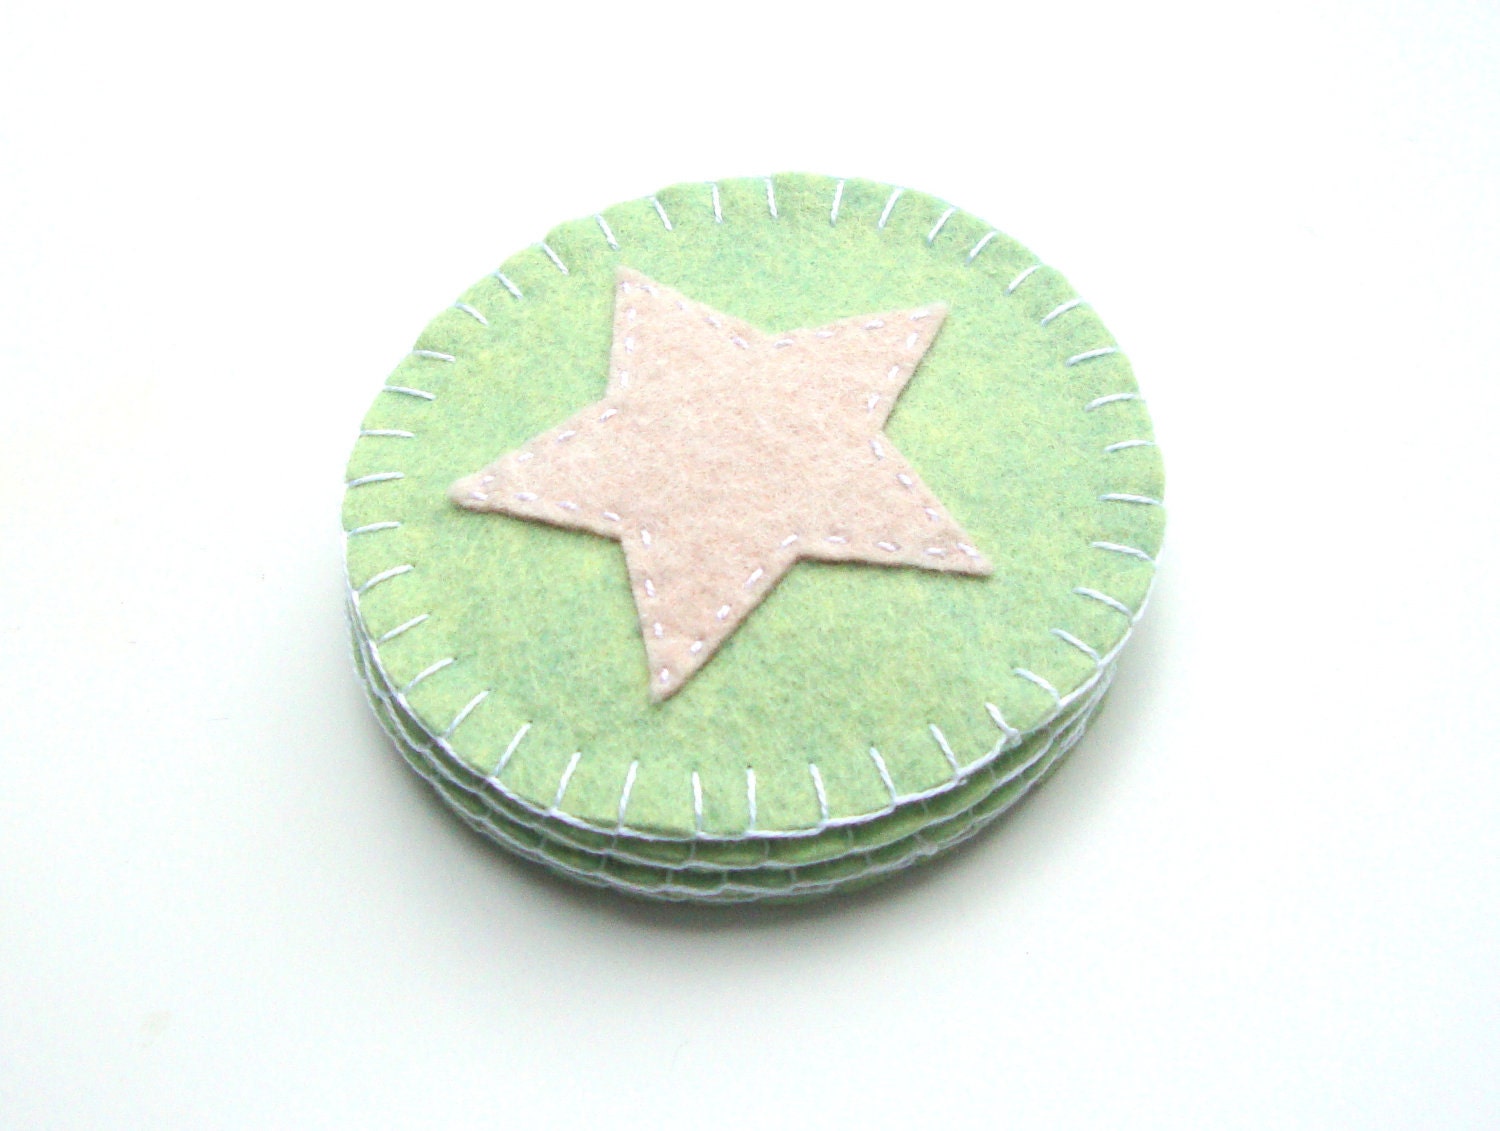 Mint Green and Beige Felt Coasters - Pastel, Star, Celestial, Handmade Home Decor - MartyMakes